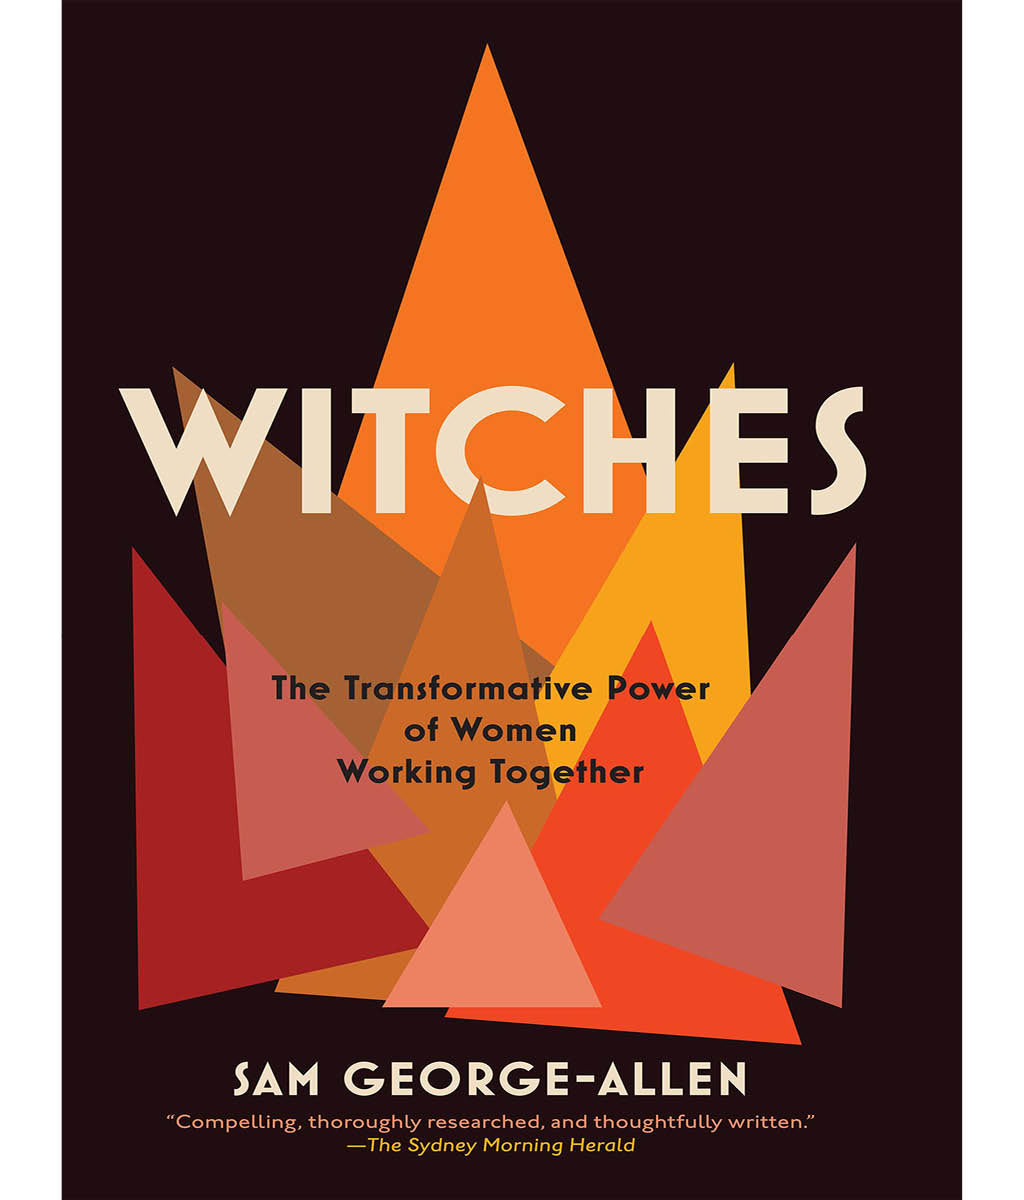 Witches: The Transformative Power of Women Working Together Sam George-Allen